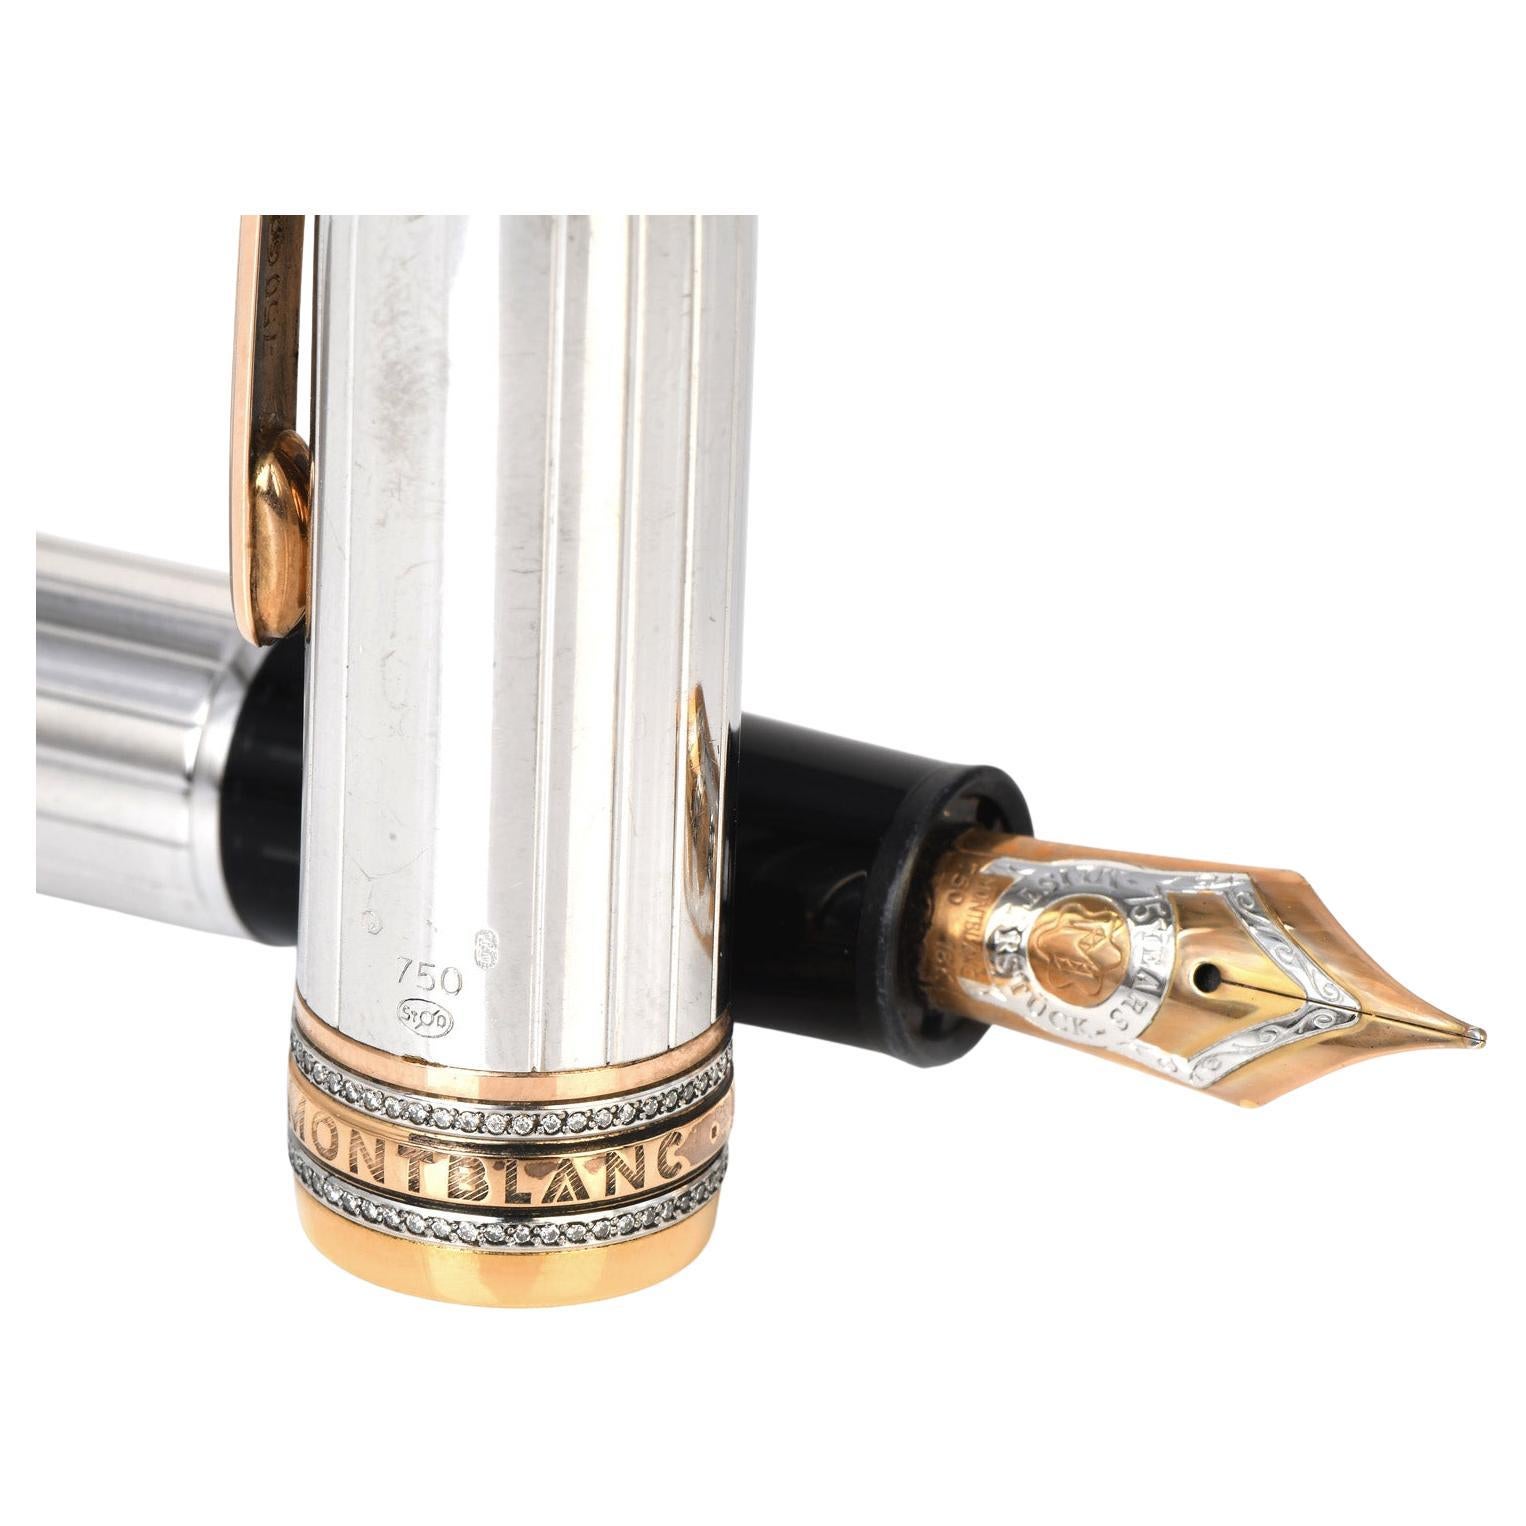 Montblanc Meisterstuck 75th Anniversary Ink Fountain Pen, from 1999.

It is the celebratory edition of 75 years of Passion and Soul from the Meisterstuck Line of Pen.

Large Solitaire 146 in solid 18K Rose & White Gold Pinstriped Design.

Displaying